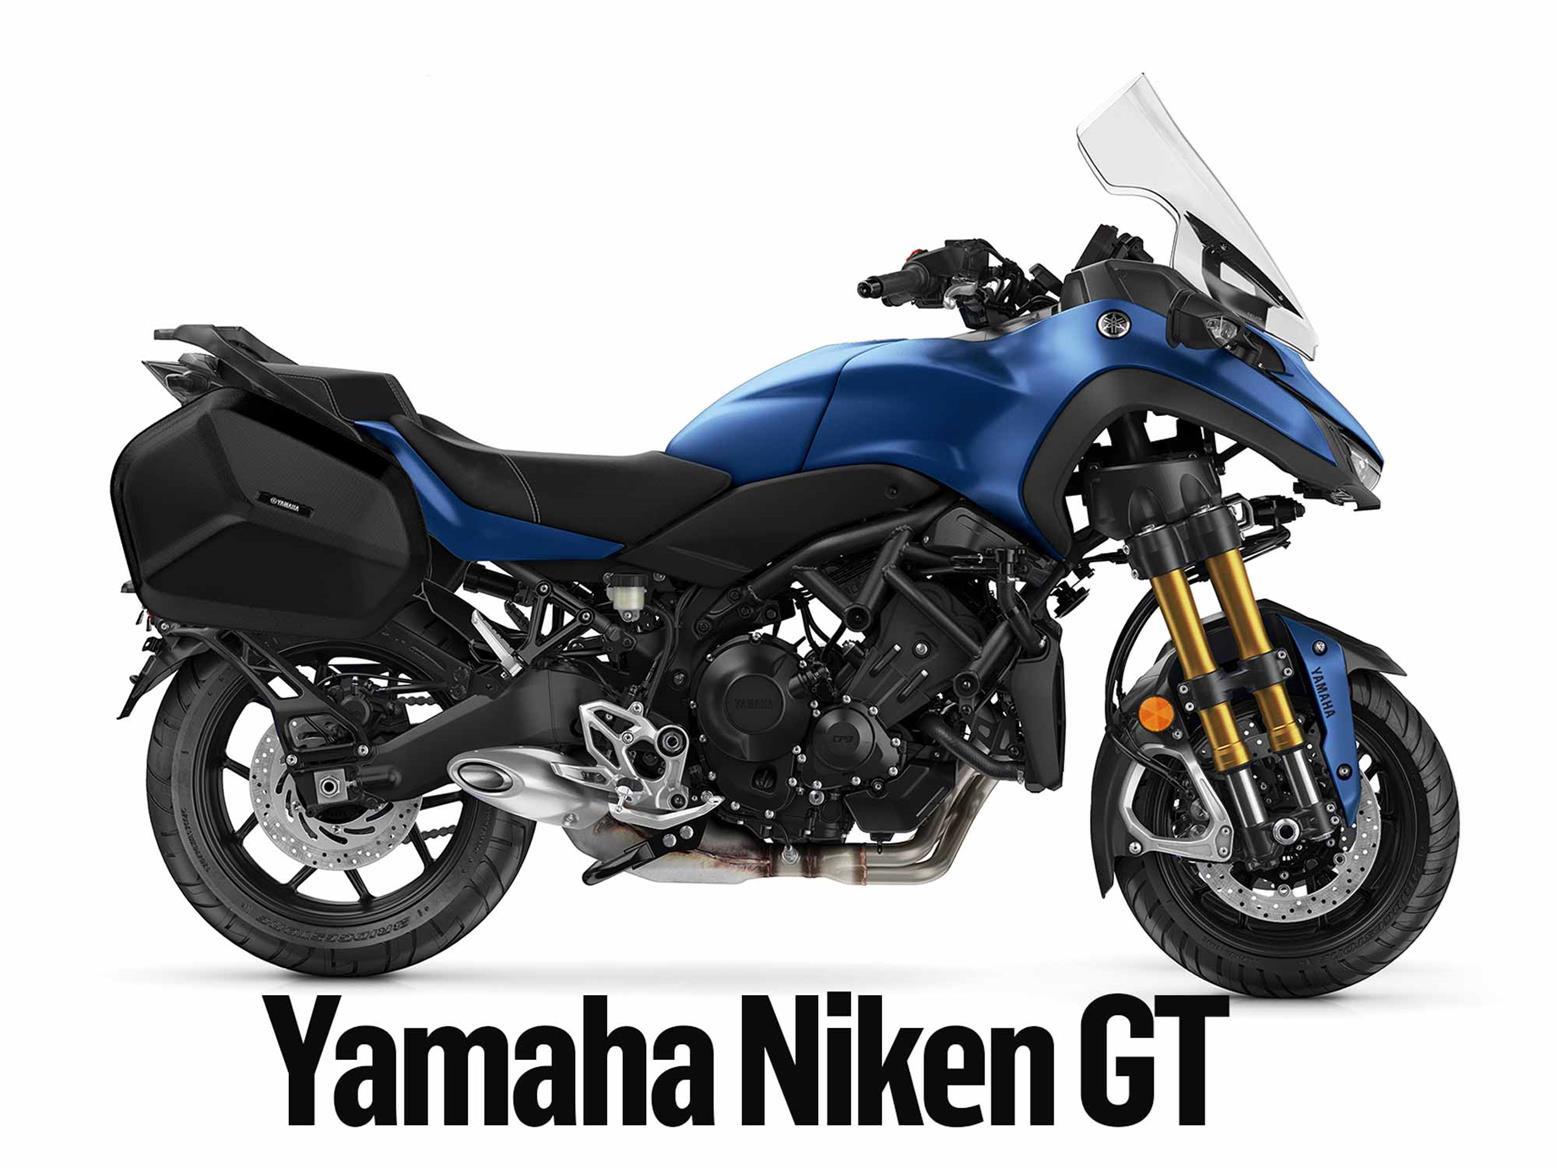 Read MCN's detailed Yamaha Niken GT long-term test review here